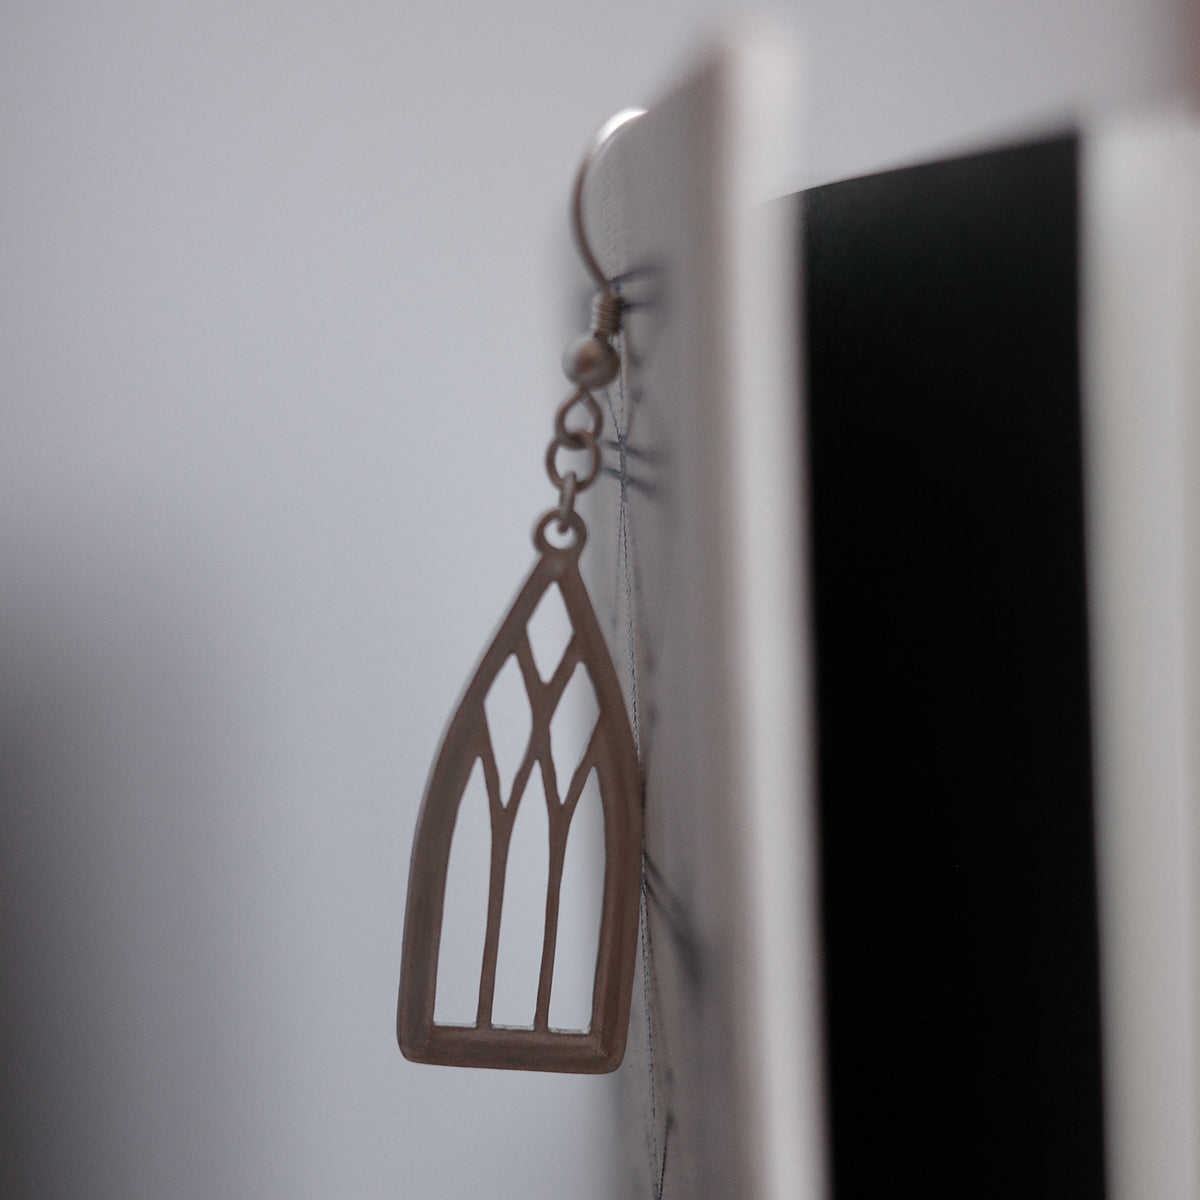 Cathedral Window Earrings - Sandblasted Sterling Silver Earrings - Christian Jewelry - Artisan Handcrafted - Limited Edition